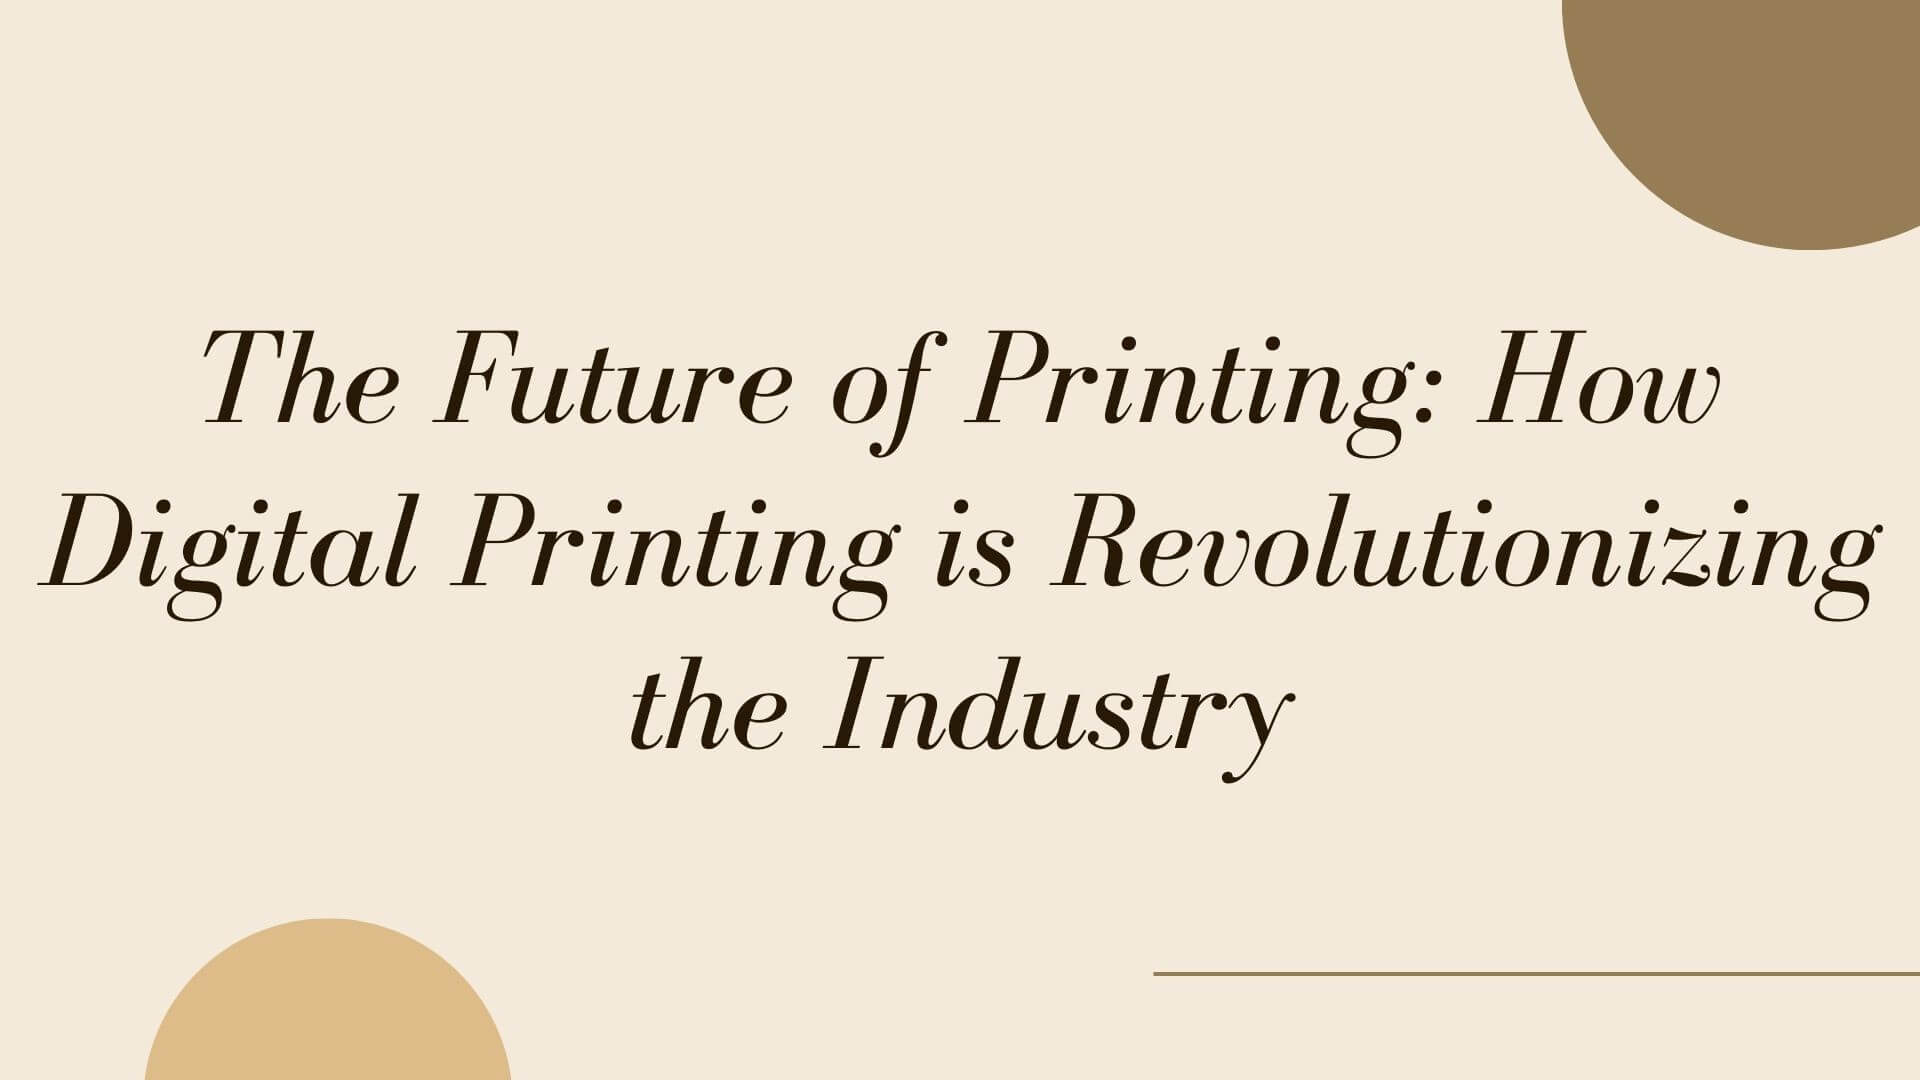 The Future of Printing: How Digital Printing is Revolutionizing the Industry